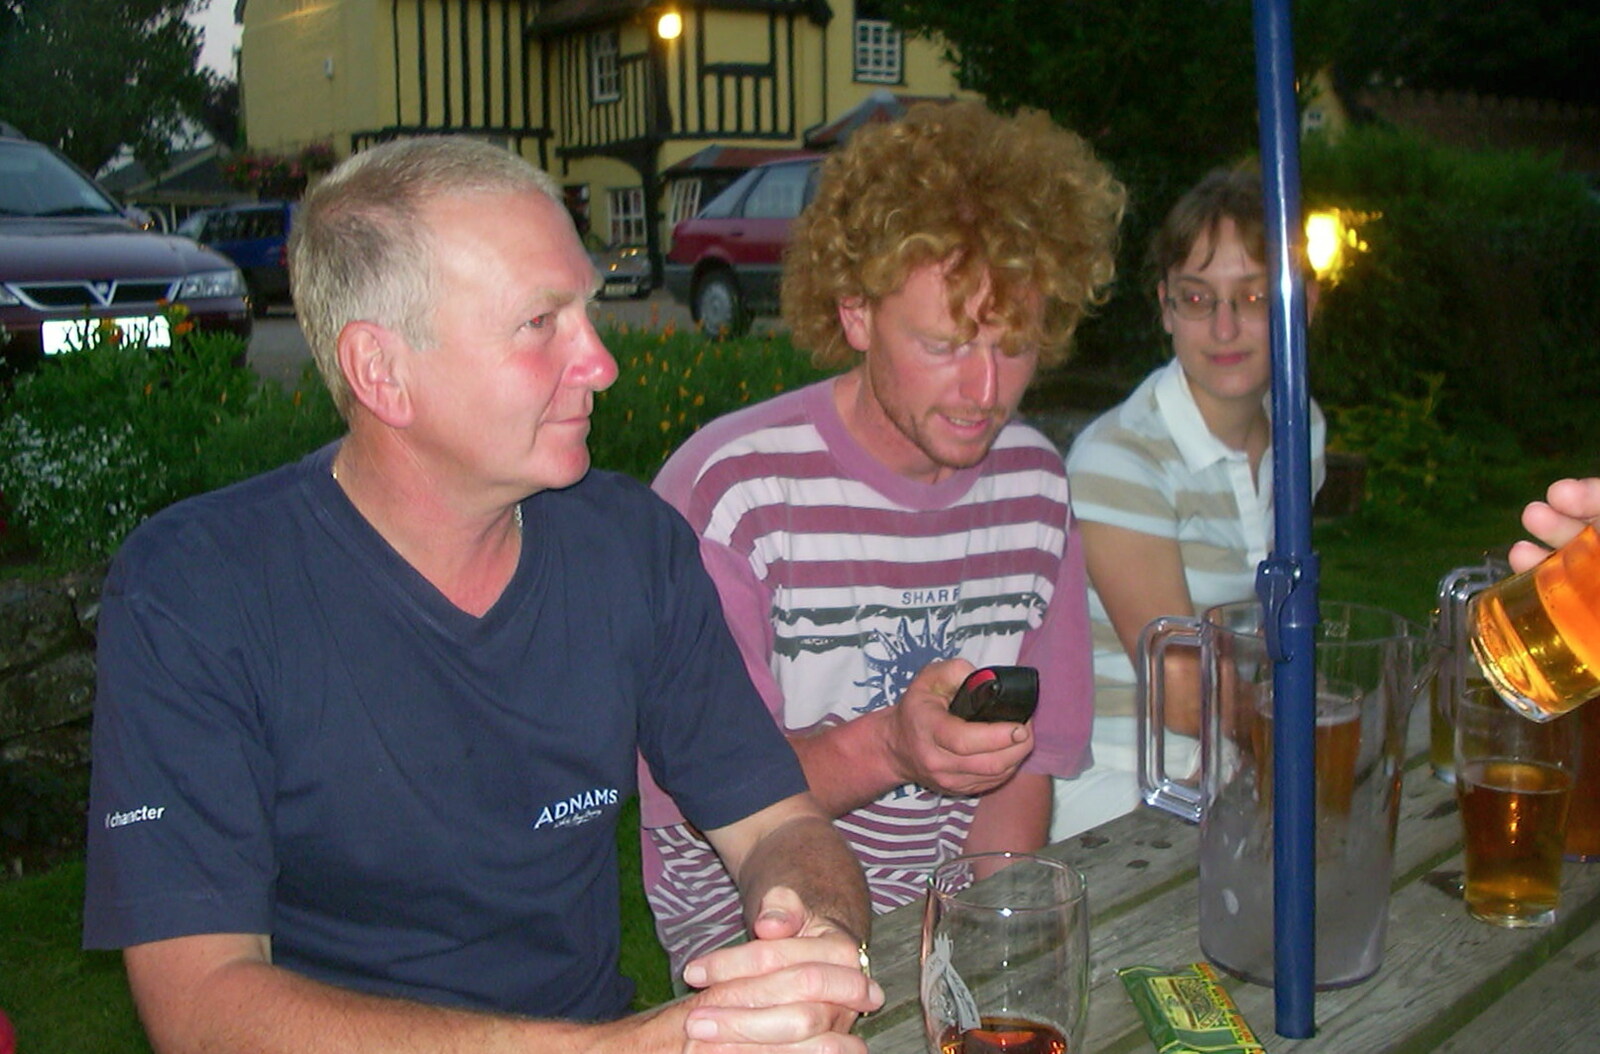 John Willy, Wavy and Suey outside the Hoxne Swan from BSCC Rides, Petanque at the Swan and July Miscellany - 21st July 2002